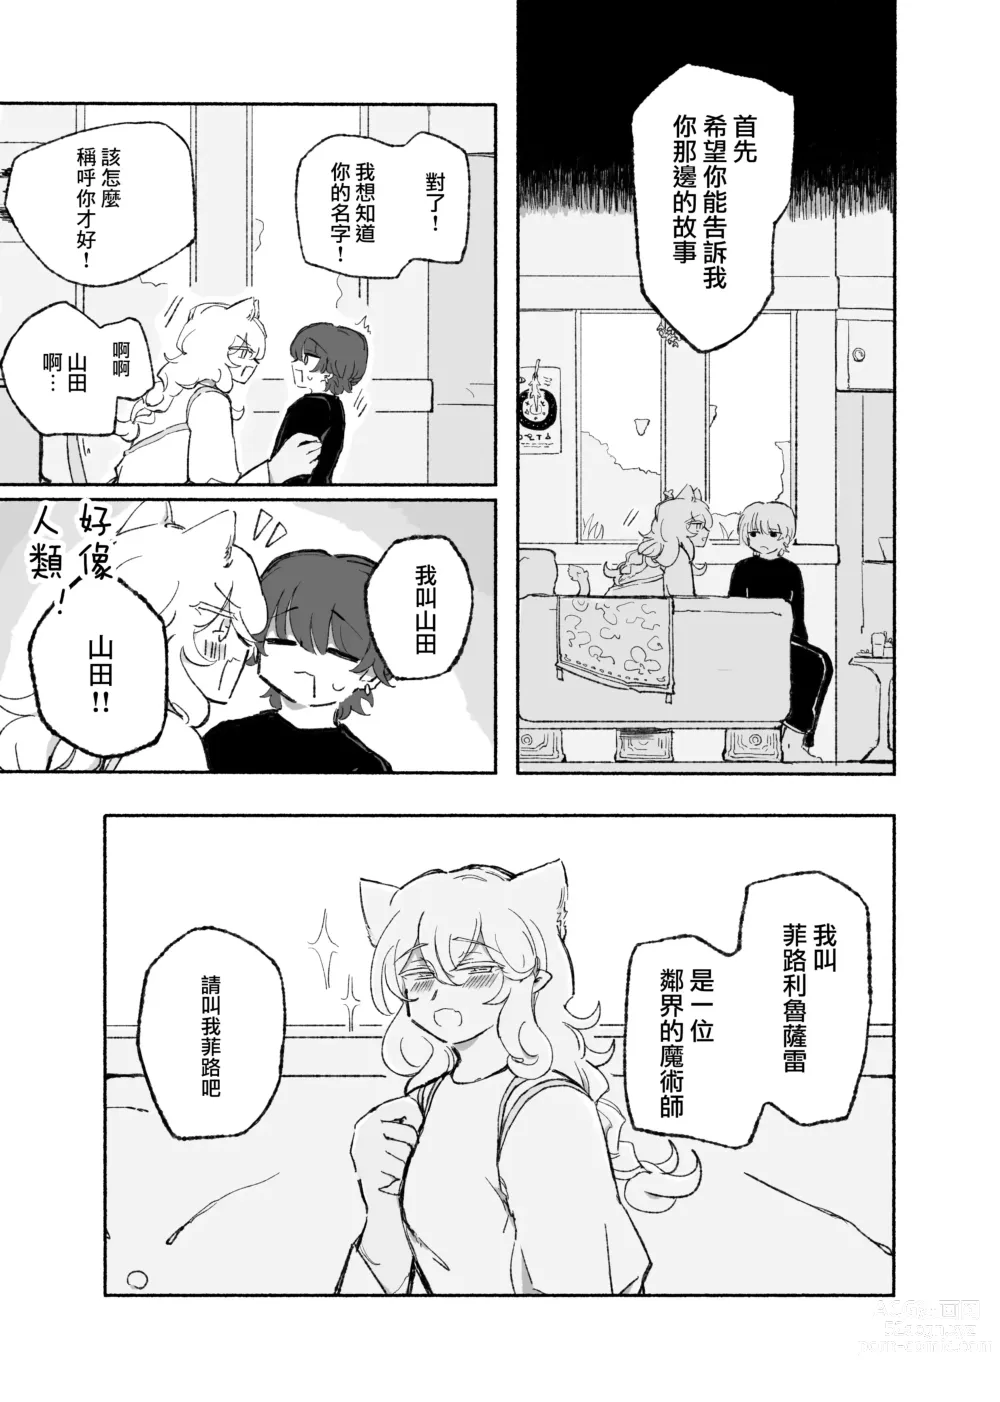 Page 11 of doujinshi 零之惡魔